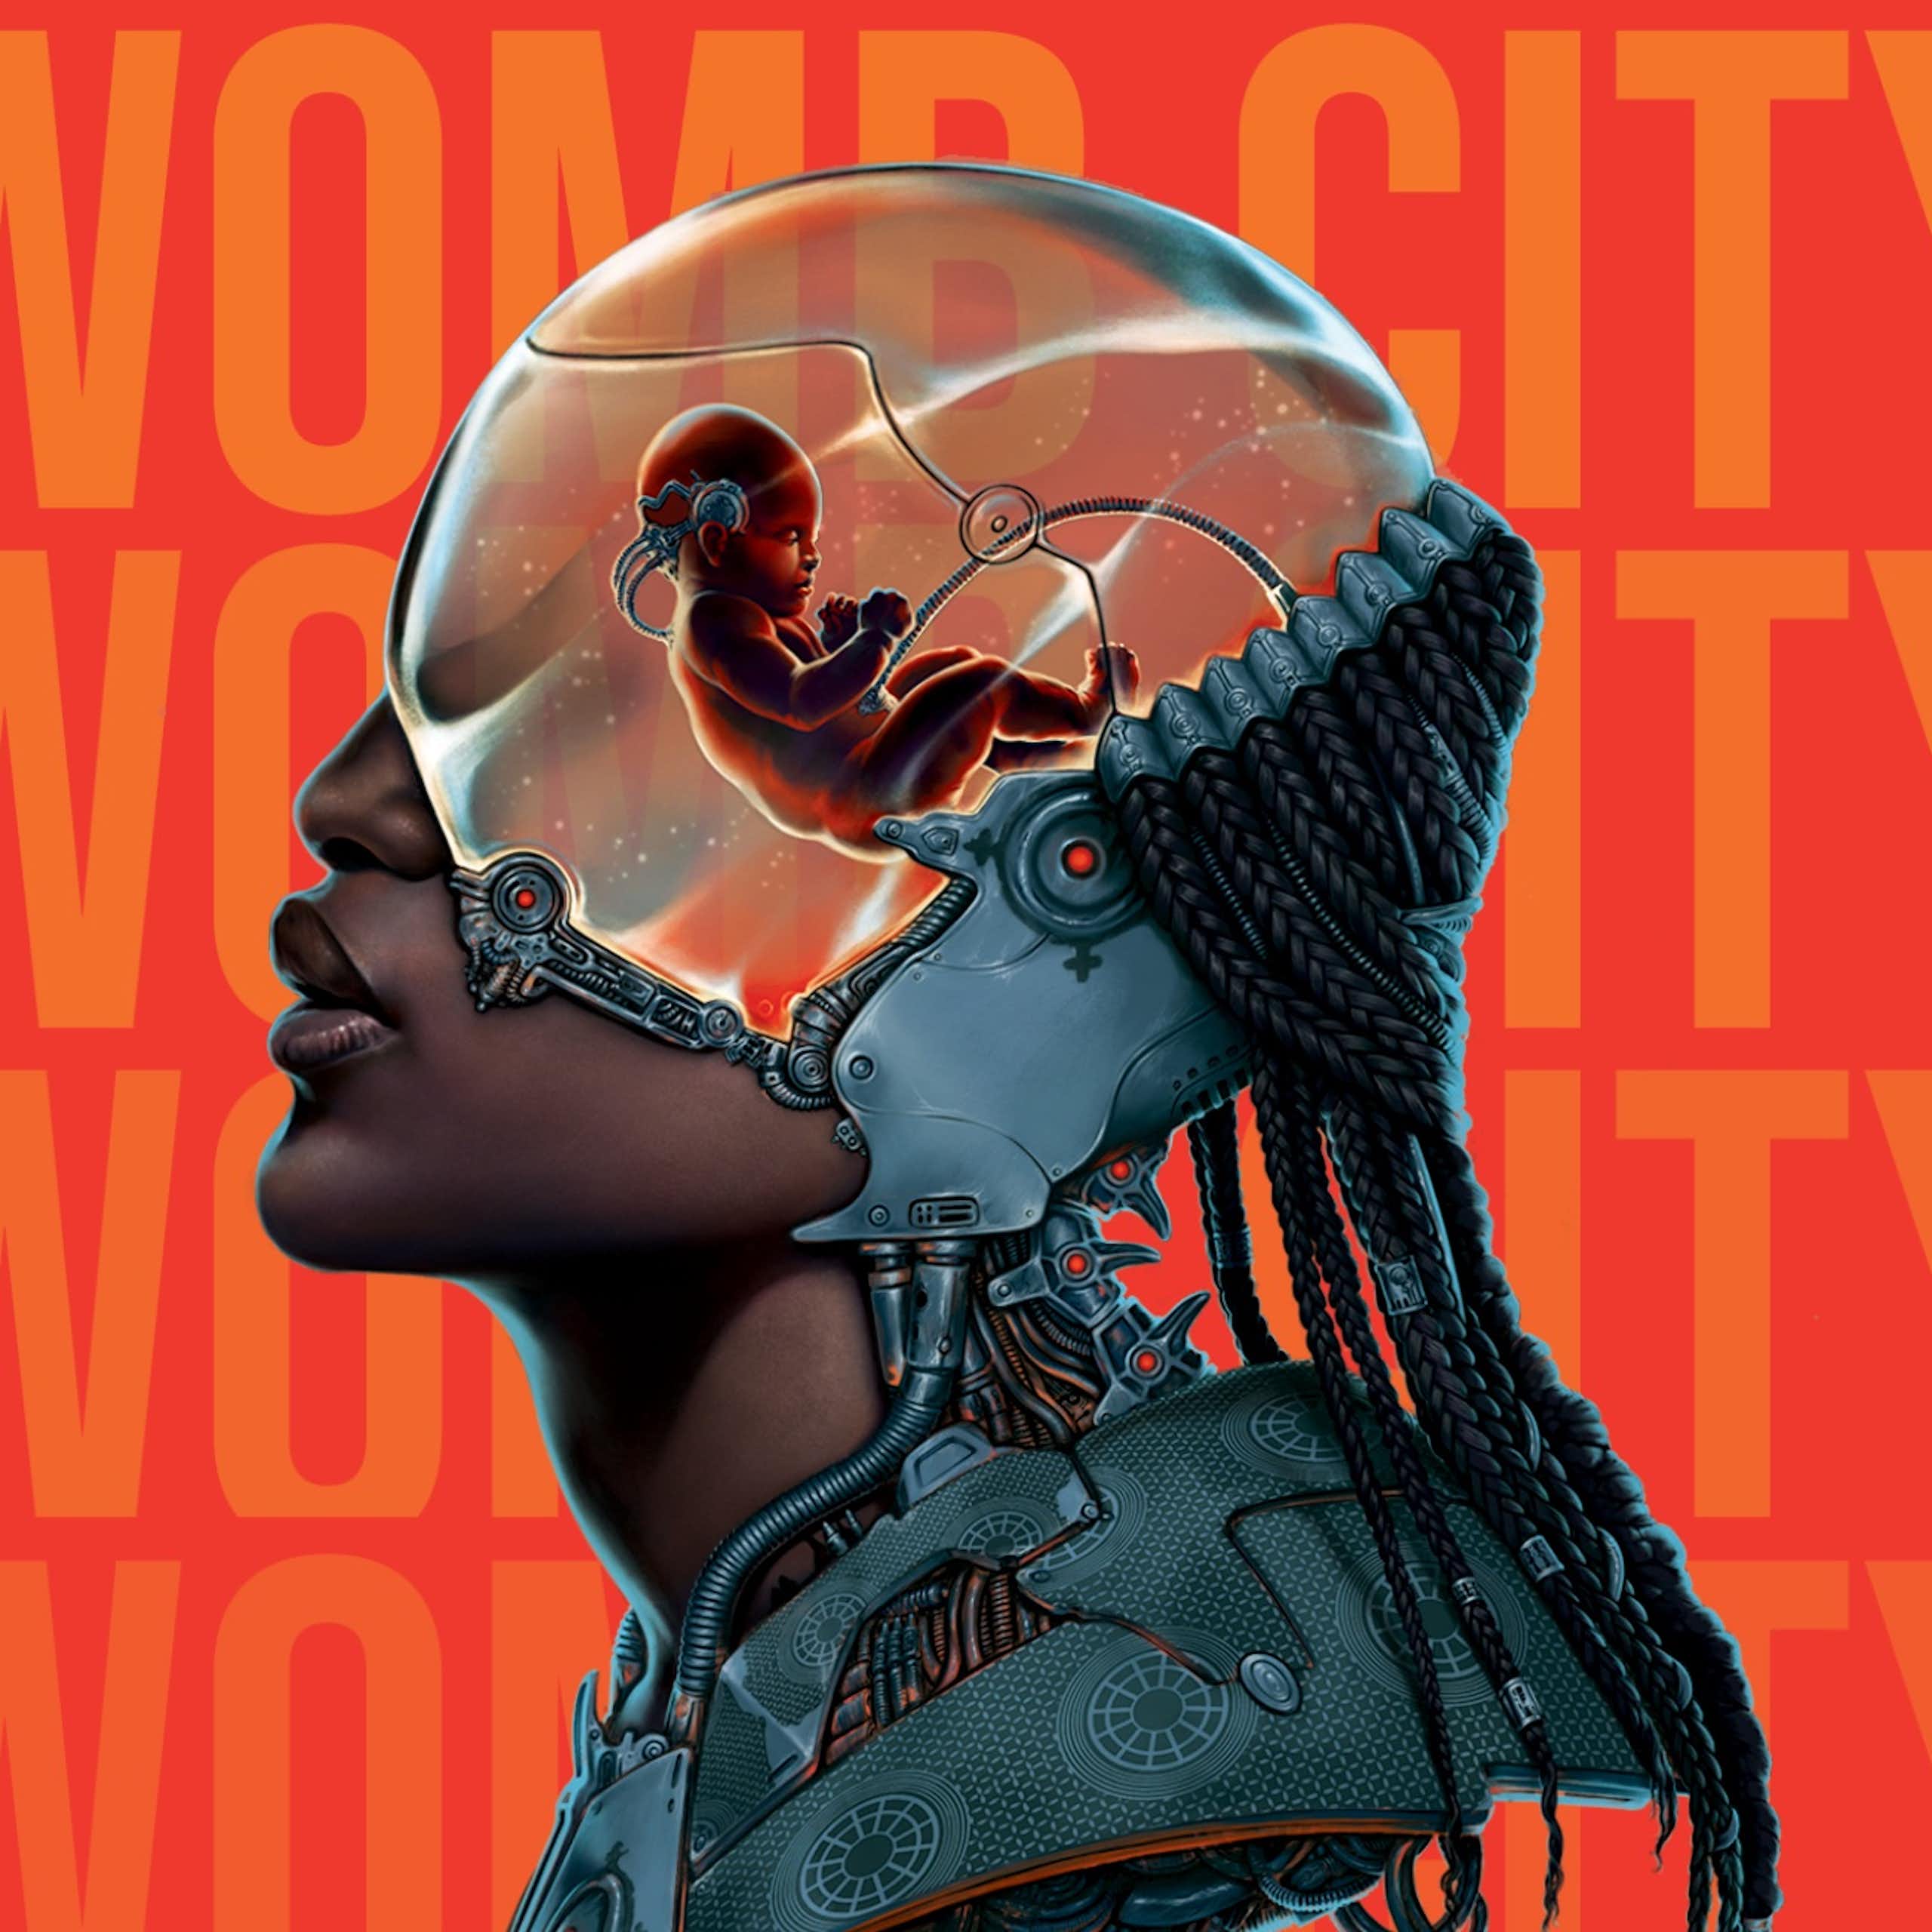 An illustration of an African woman in profile, a futurist glass dome covering her forehead and eyes attached to the body with metal. Inside the dome, a foetus.